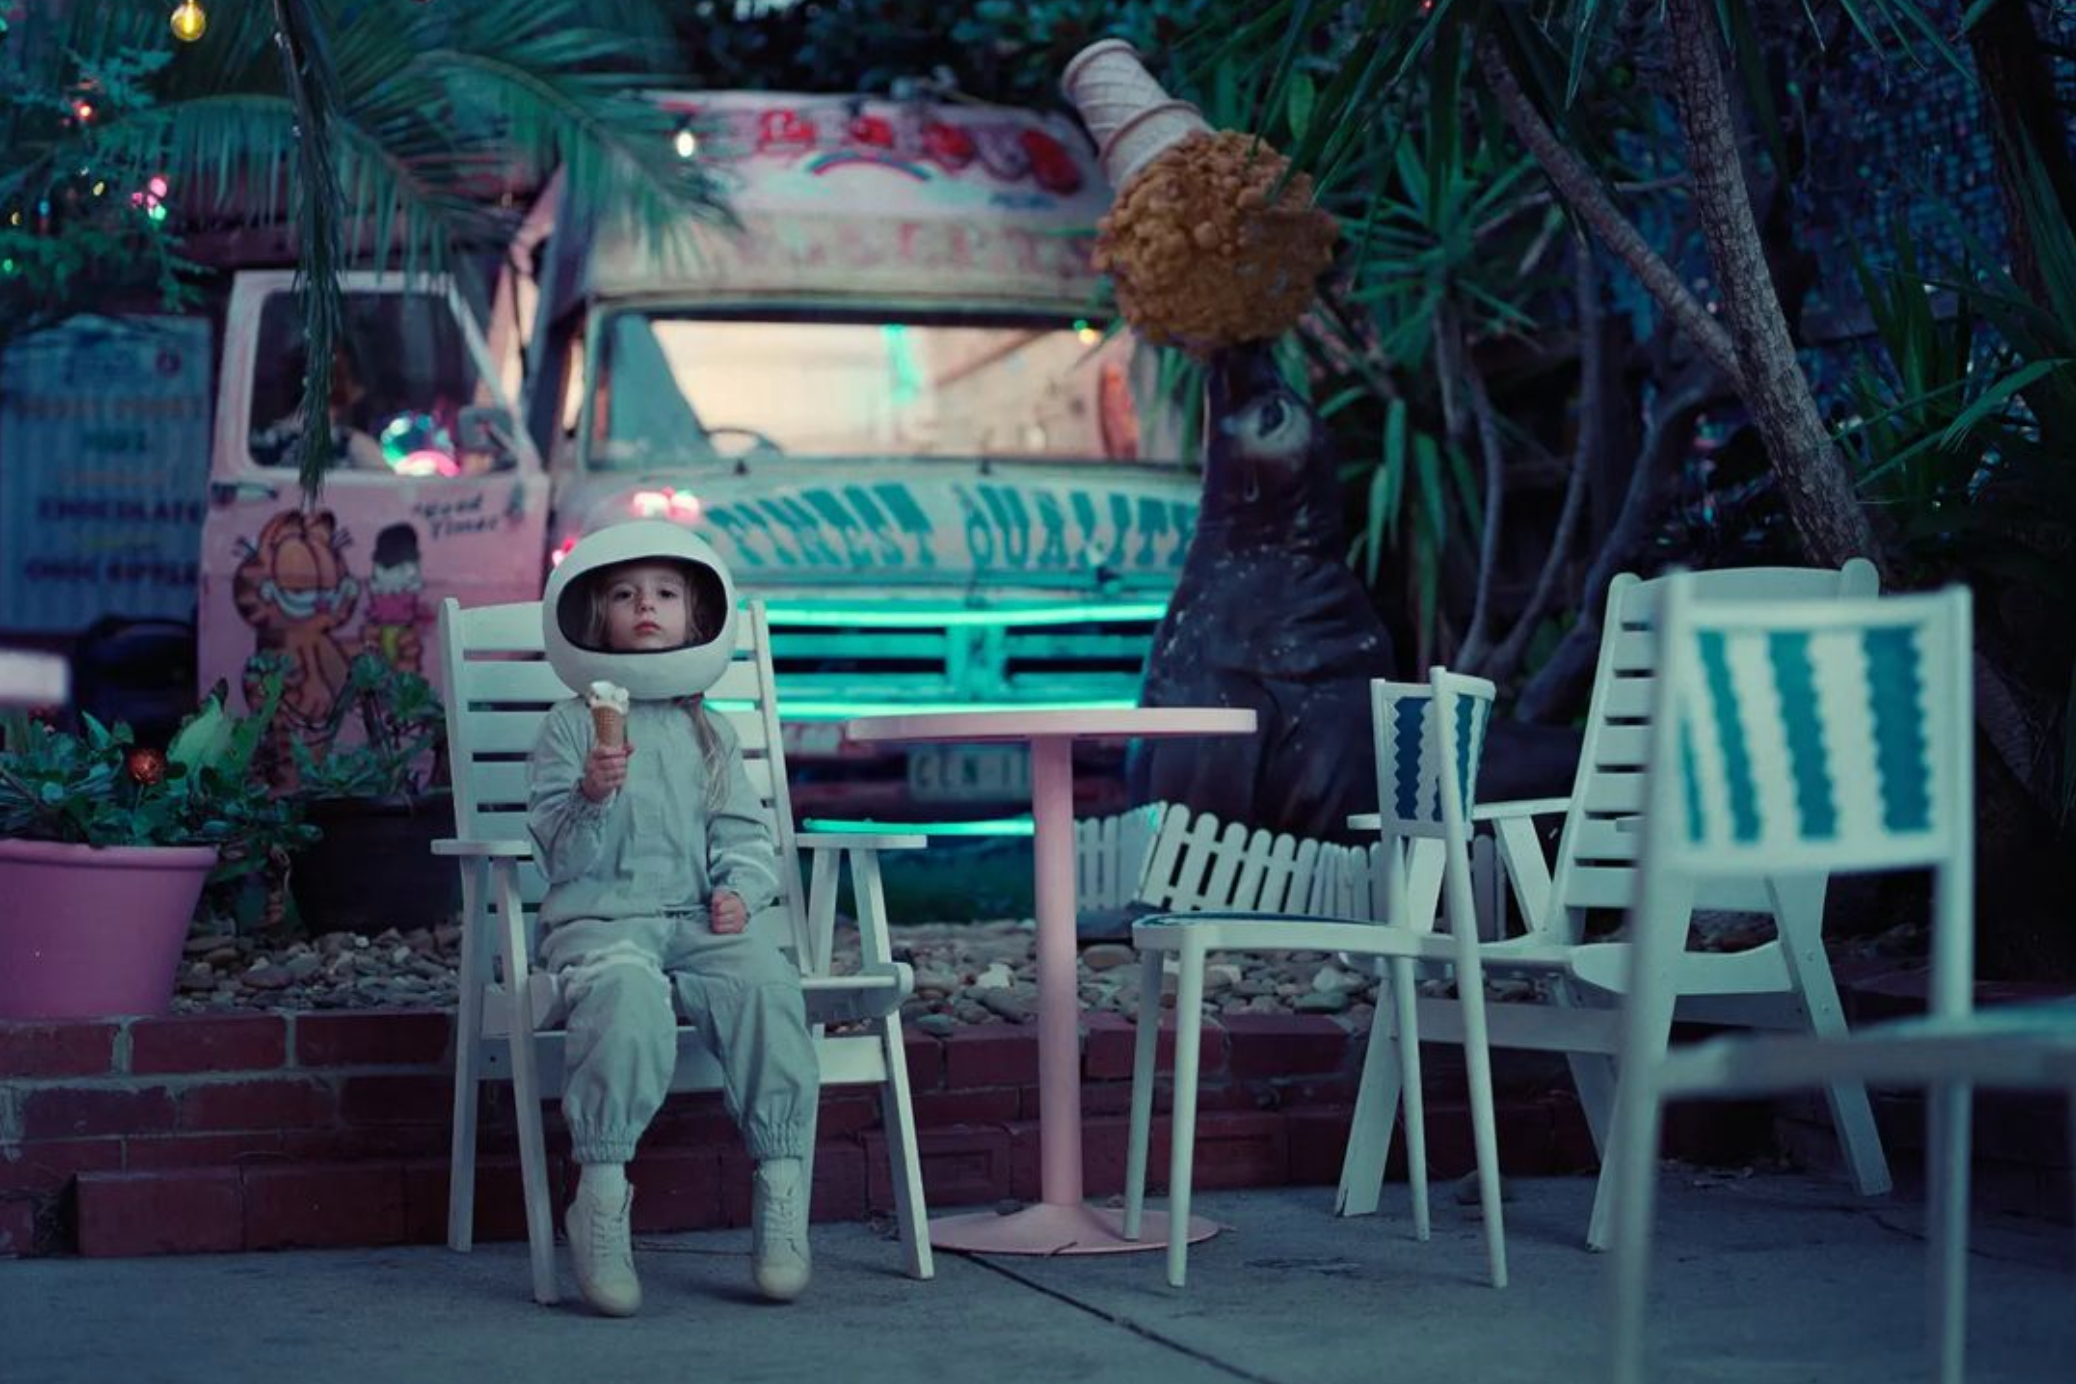 boy dressed as an astronaut sitting in a plastic chair.